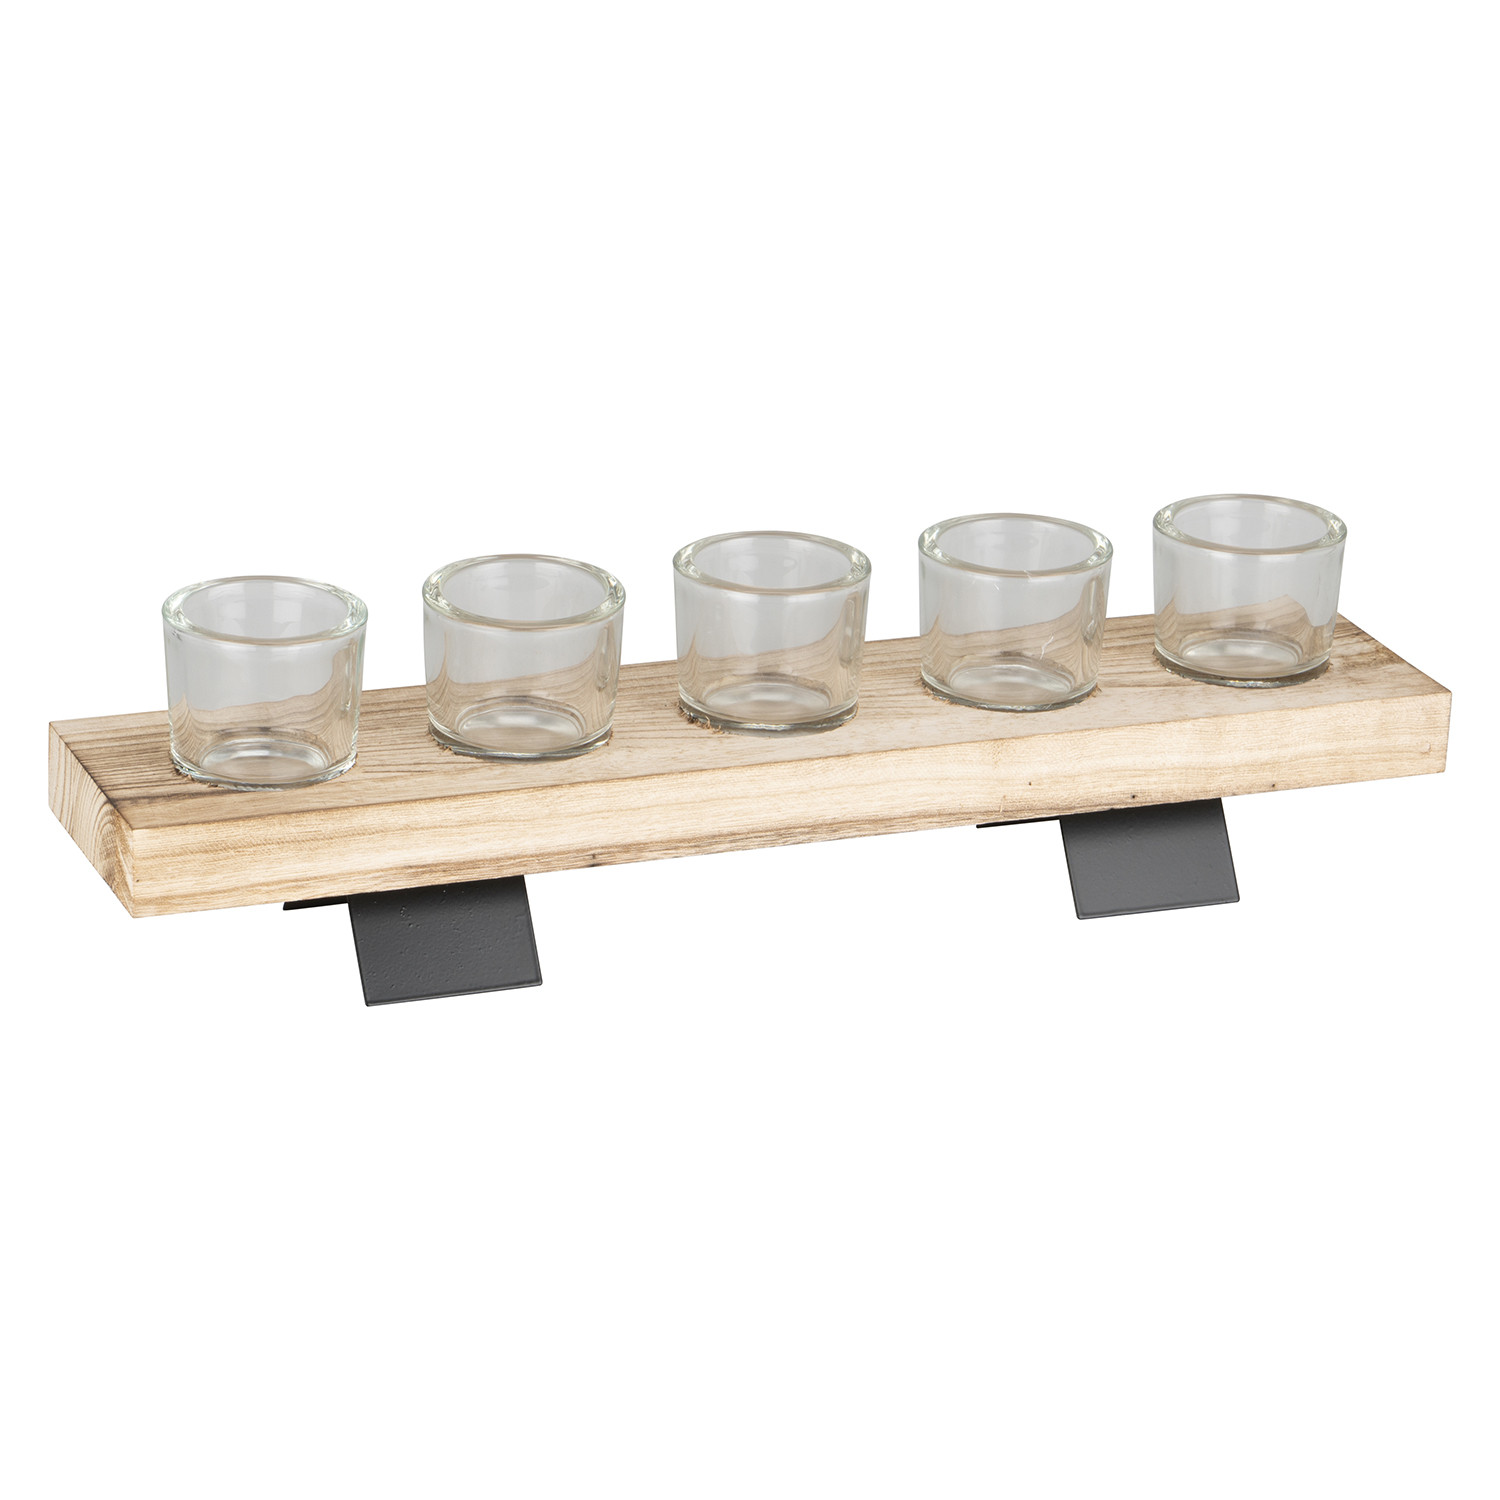 Tealight Candle Holder with Wooden Tray Image